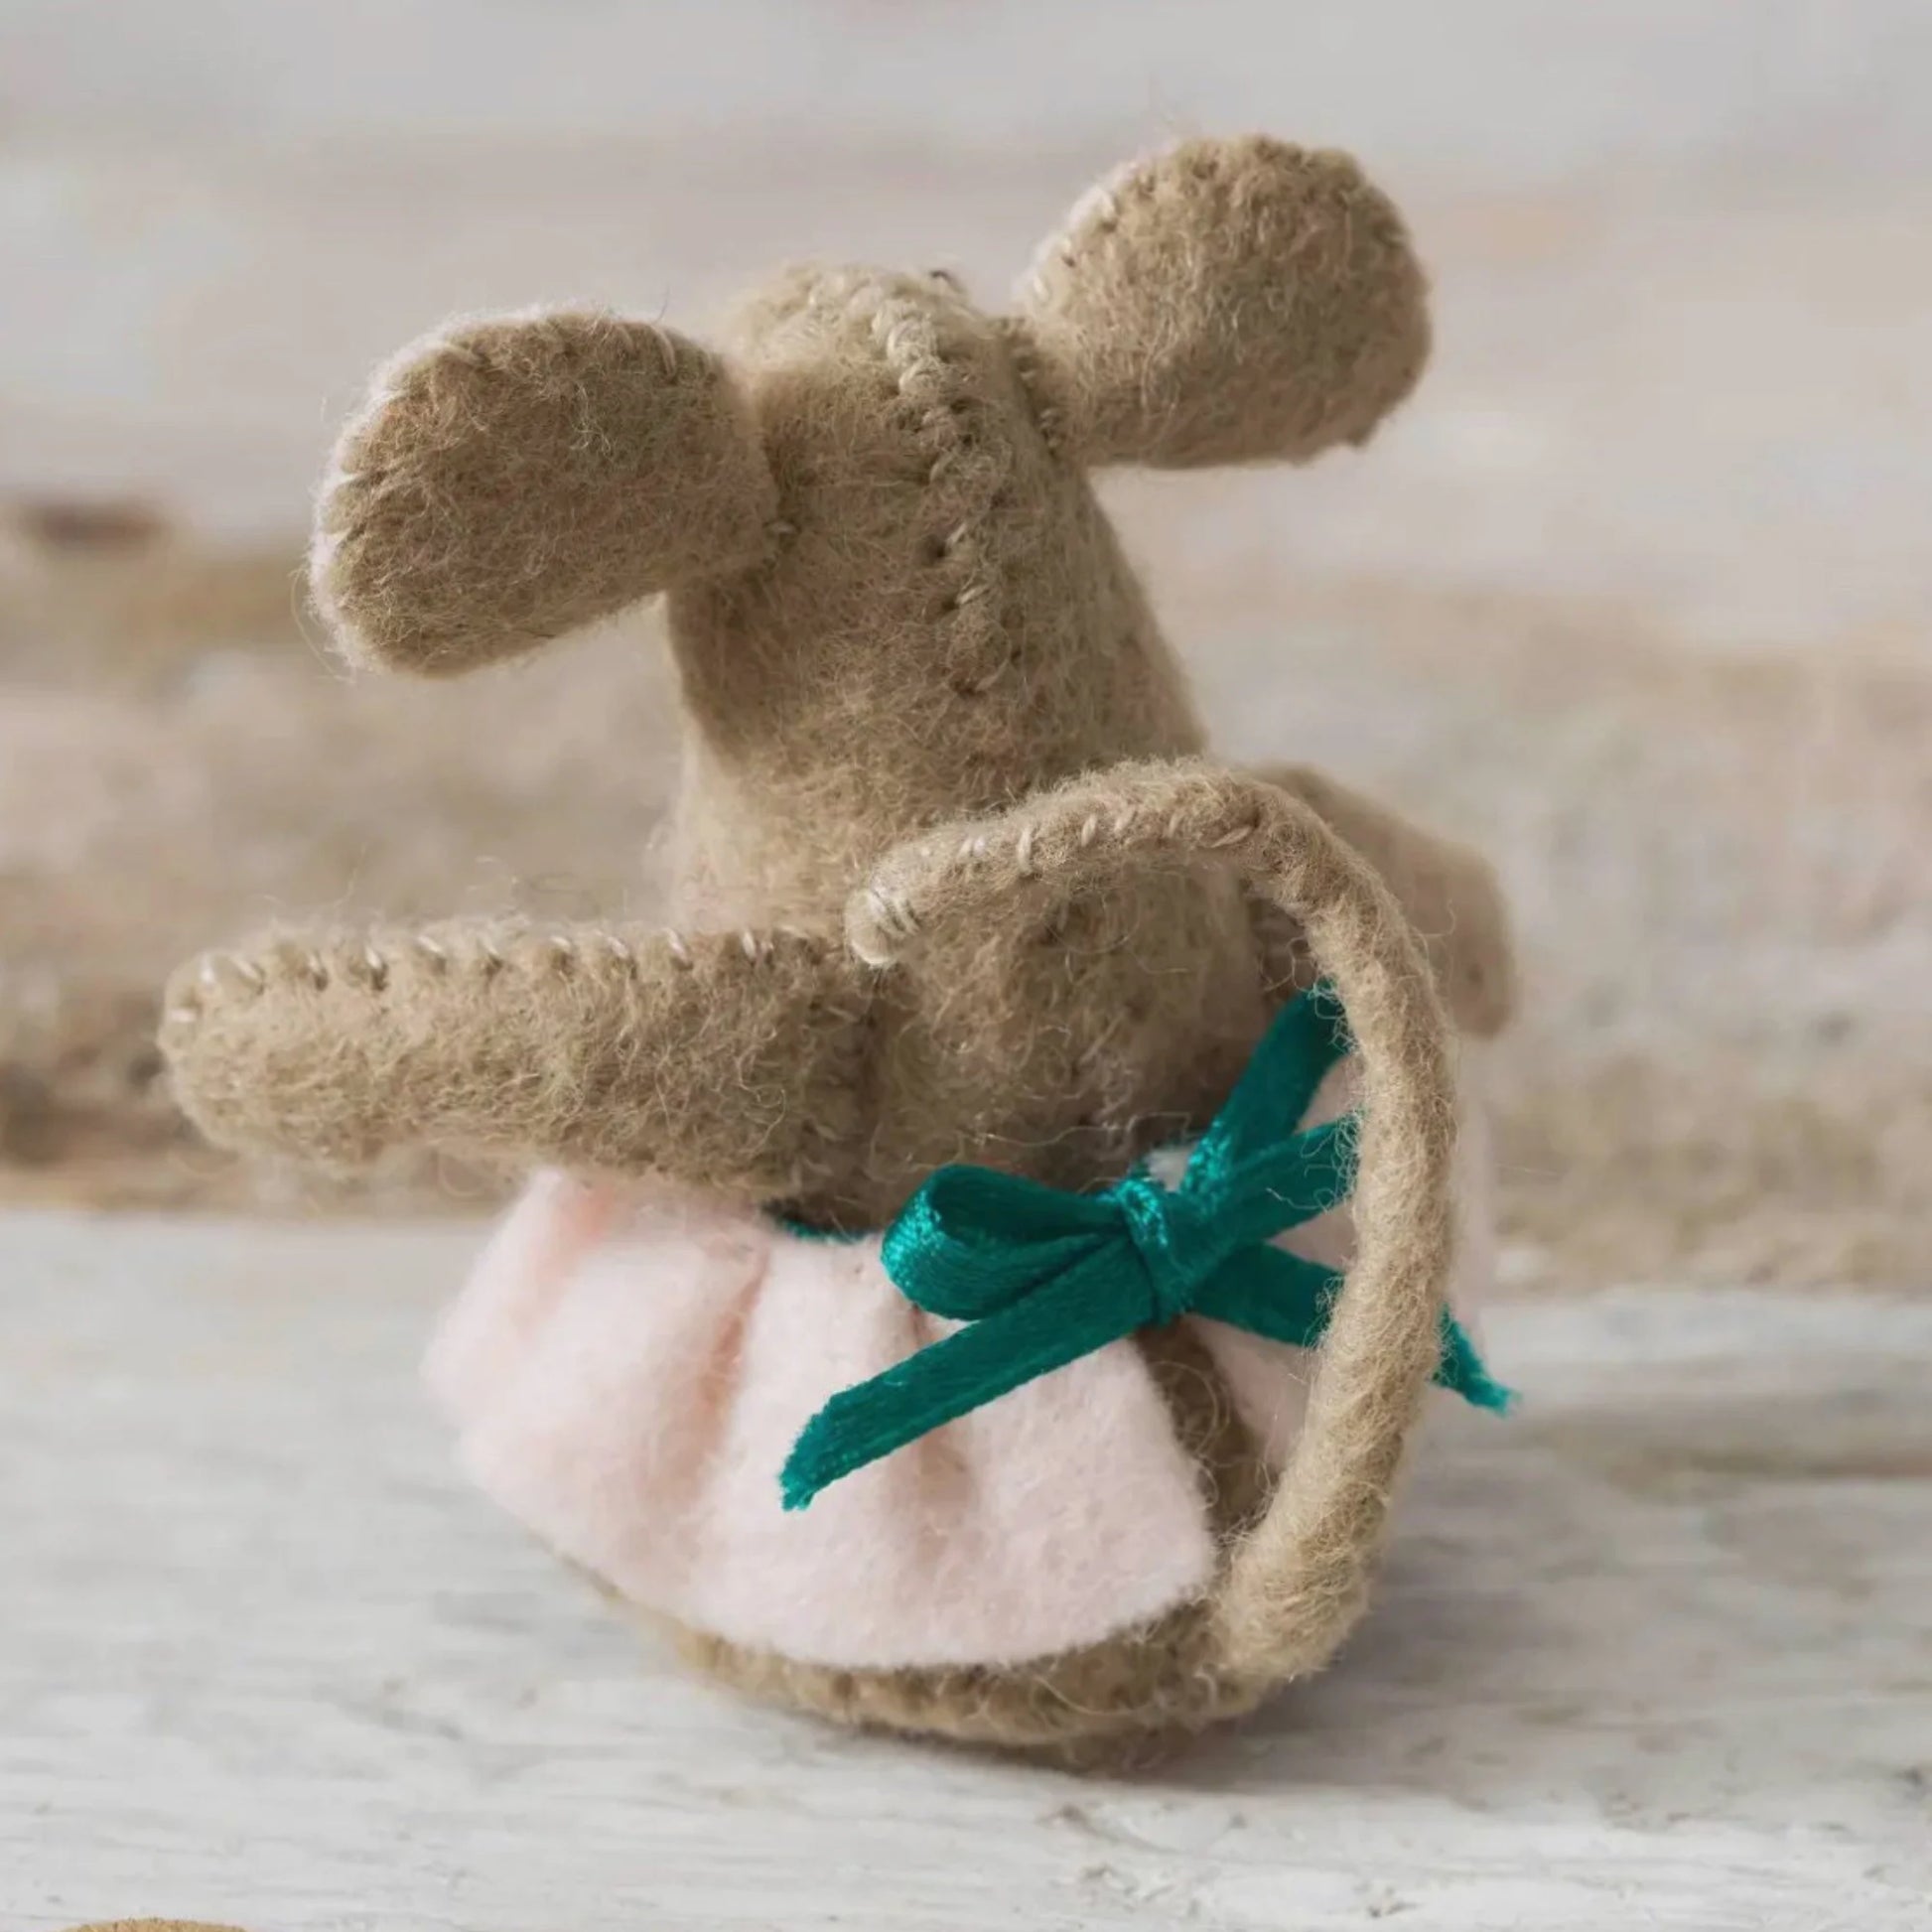 Felt Sewing Kit Mouse Family Little Tan Mouse in a Skirt by Corinne Lapierre - Alder & Alouette